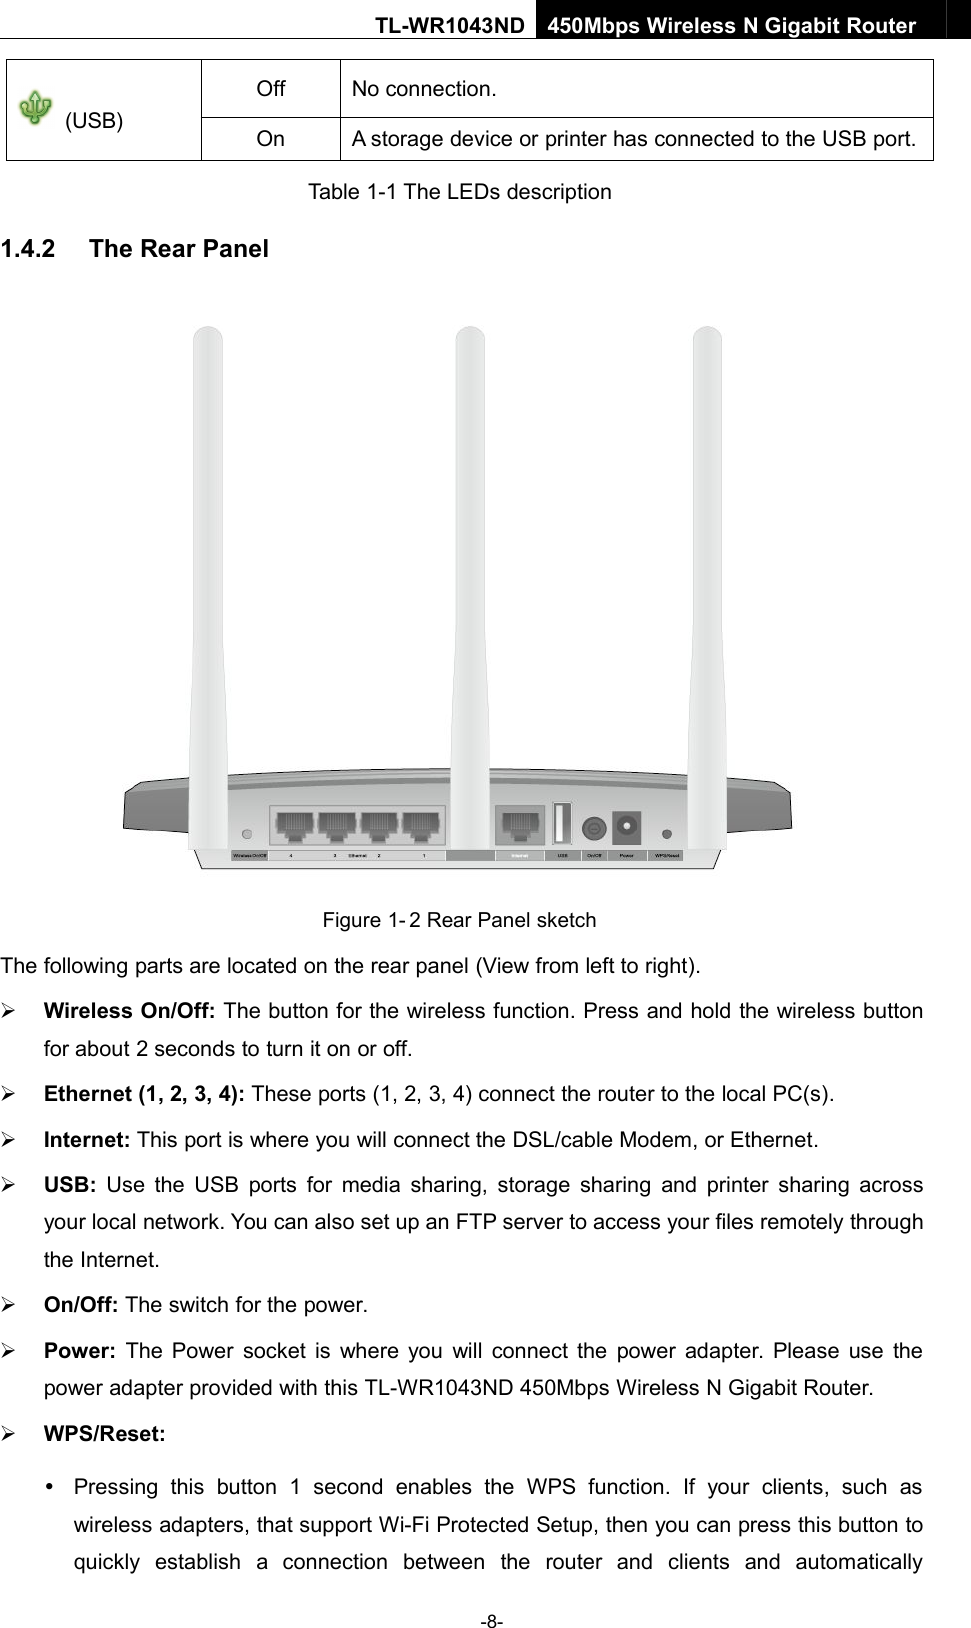 -8-TL-WR1043ND450Mbps Wireless N Gigabit Router(USB)OffNo connection.OnA storage device or printer has connected to the USB port.Table 1-1 The LEDs description1.4.2 The Rear PanelFigure 1- 2 Rear Panel sketchThe following parts are located on the rear panel (View from left to right).Wireless On/Off: The button for the wireless function. Press and hold the wireless buttonfor about 2 seconds to turn it on or off.Ethernet (1, 2, 3, 4): These ports (1, 2, 3, 4) connect the router to the local PC(s).Internet: This port is where you will connect the DSL/cable Modem, or Ethernet.USB: Use the USB ports for media sharing, storage sharing and printer sharing acrossyour local network. You can also set up an FTP server to access your files remotely throughthe Internet.On/Off: The switch for the power.Power: The Power socket is where you will connect the power adapter. Please use thepower adapter provided with this TL-WR1043ND 450Mbps Wireless N Gigabit Router.WPS/Reset:Pressing this button 1 second enables the WPS function. If your clients, such aswireless adapters, that support Wi-Fi Protected Setup, then you can press this button toquickly establish a connection between the router and clients and automatically